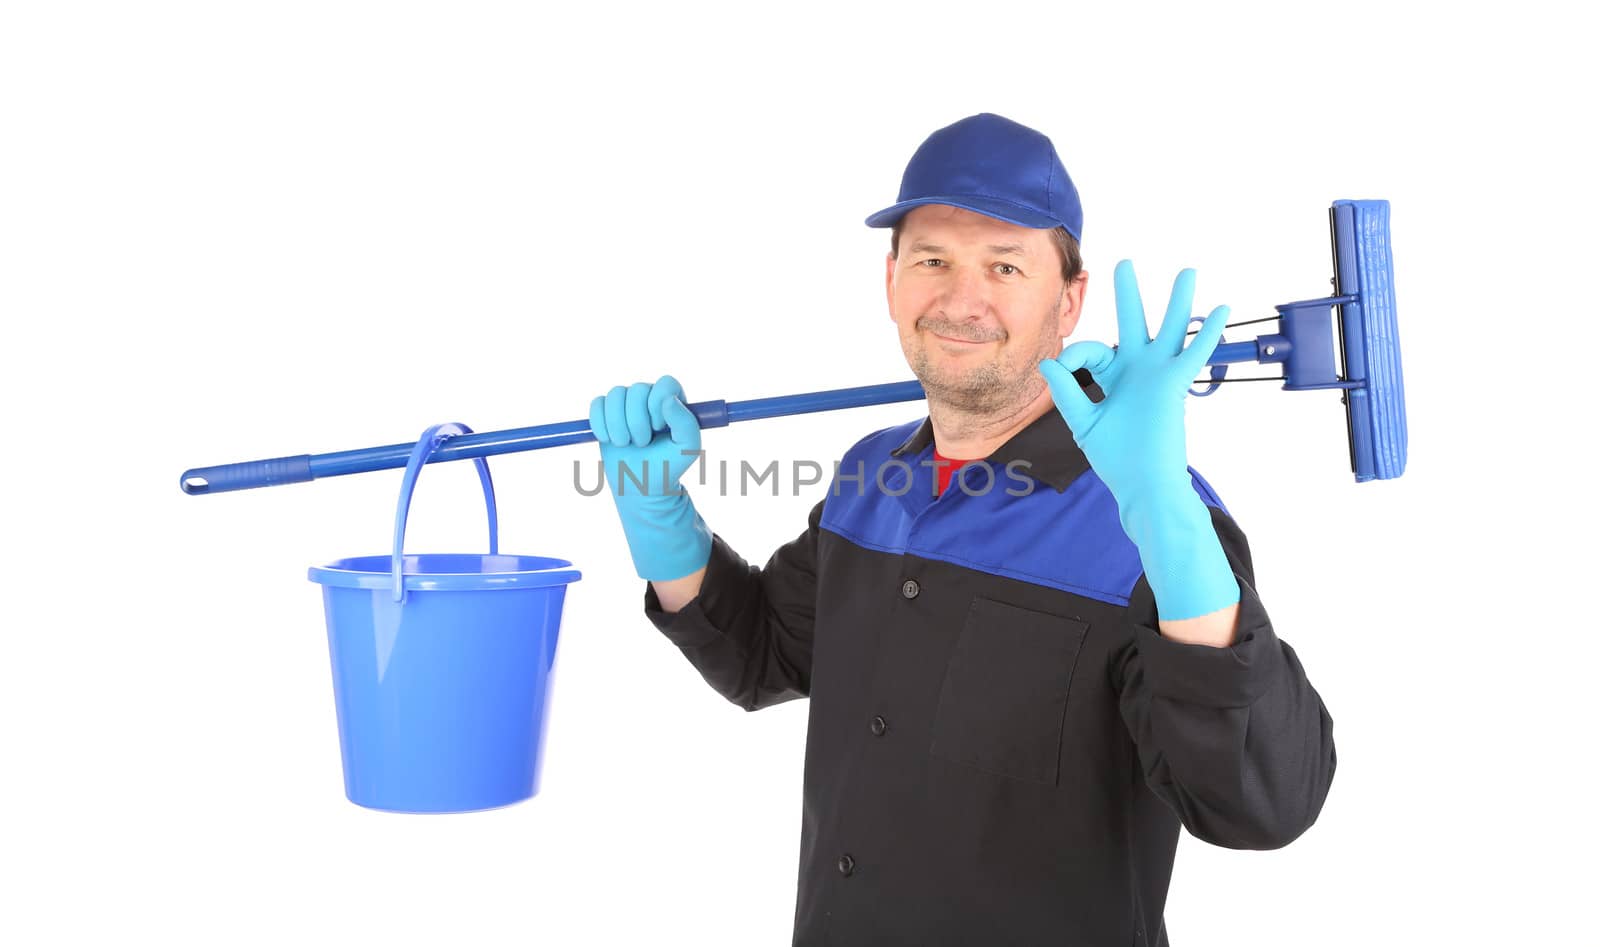 Man holding broom and bucket. Isolated on a white background.